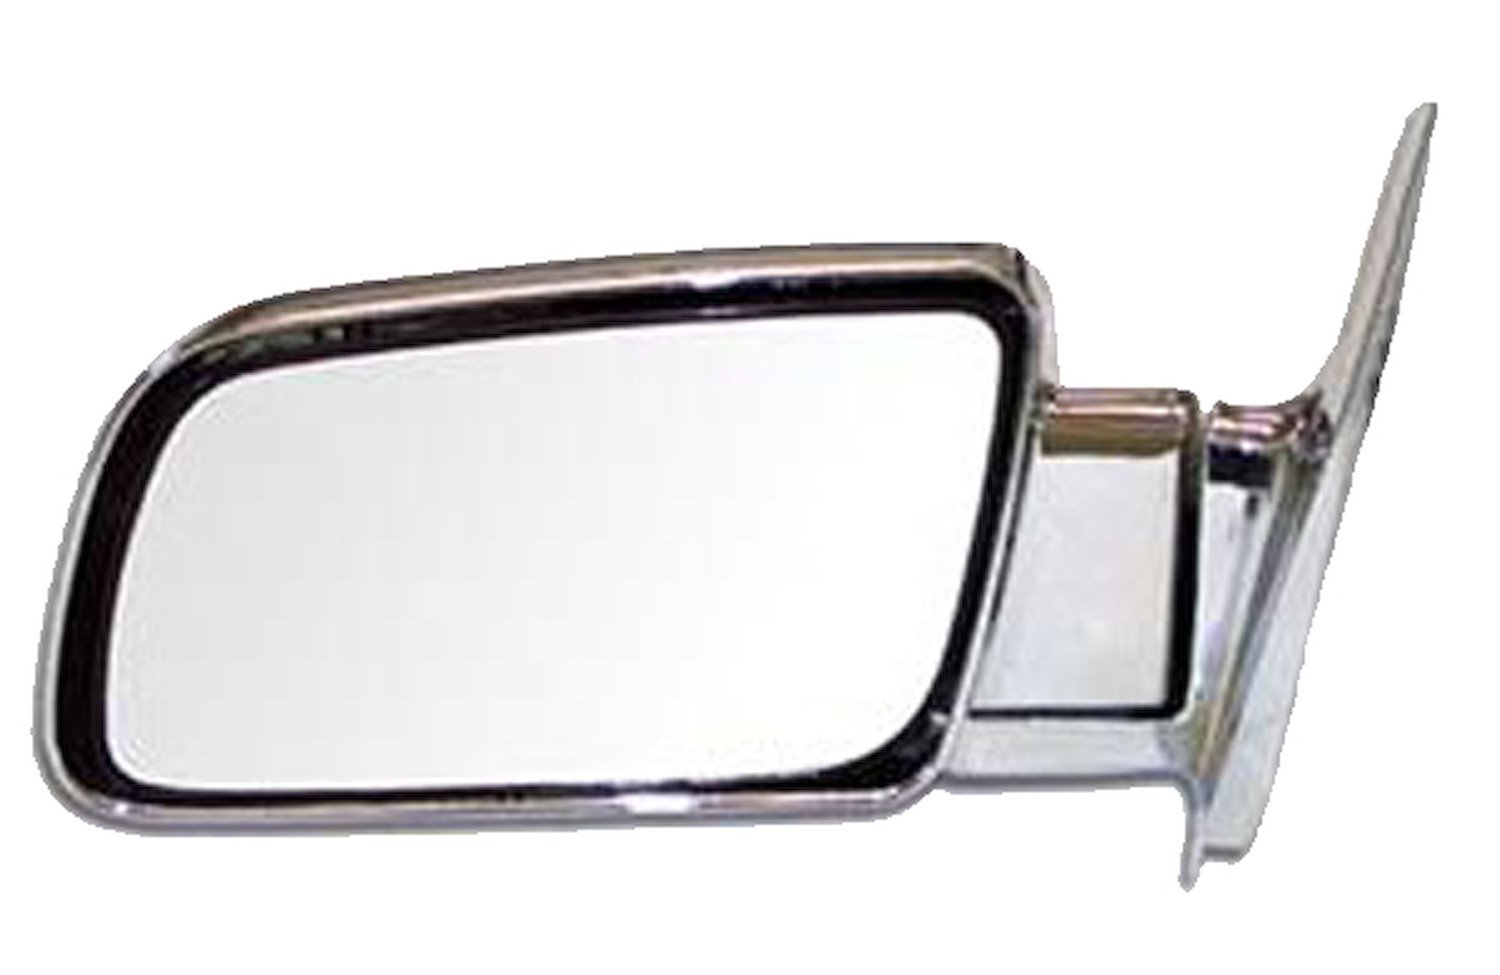 OE Replacement Power Door Mirror for 1988-2002 GM C/K Truck, Left/Driver Side [Chrome]